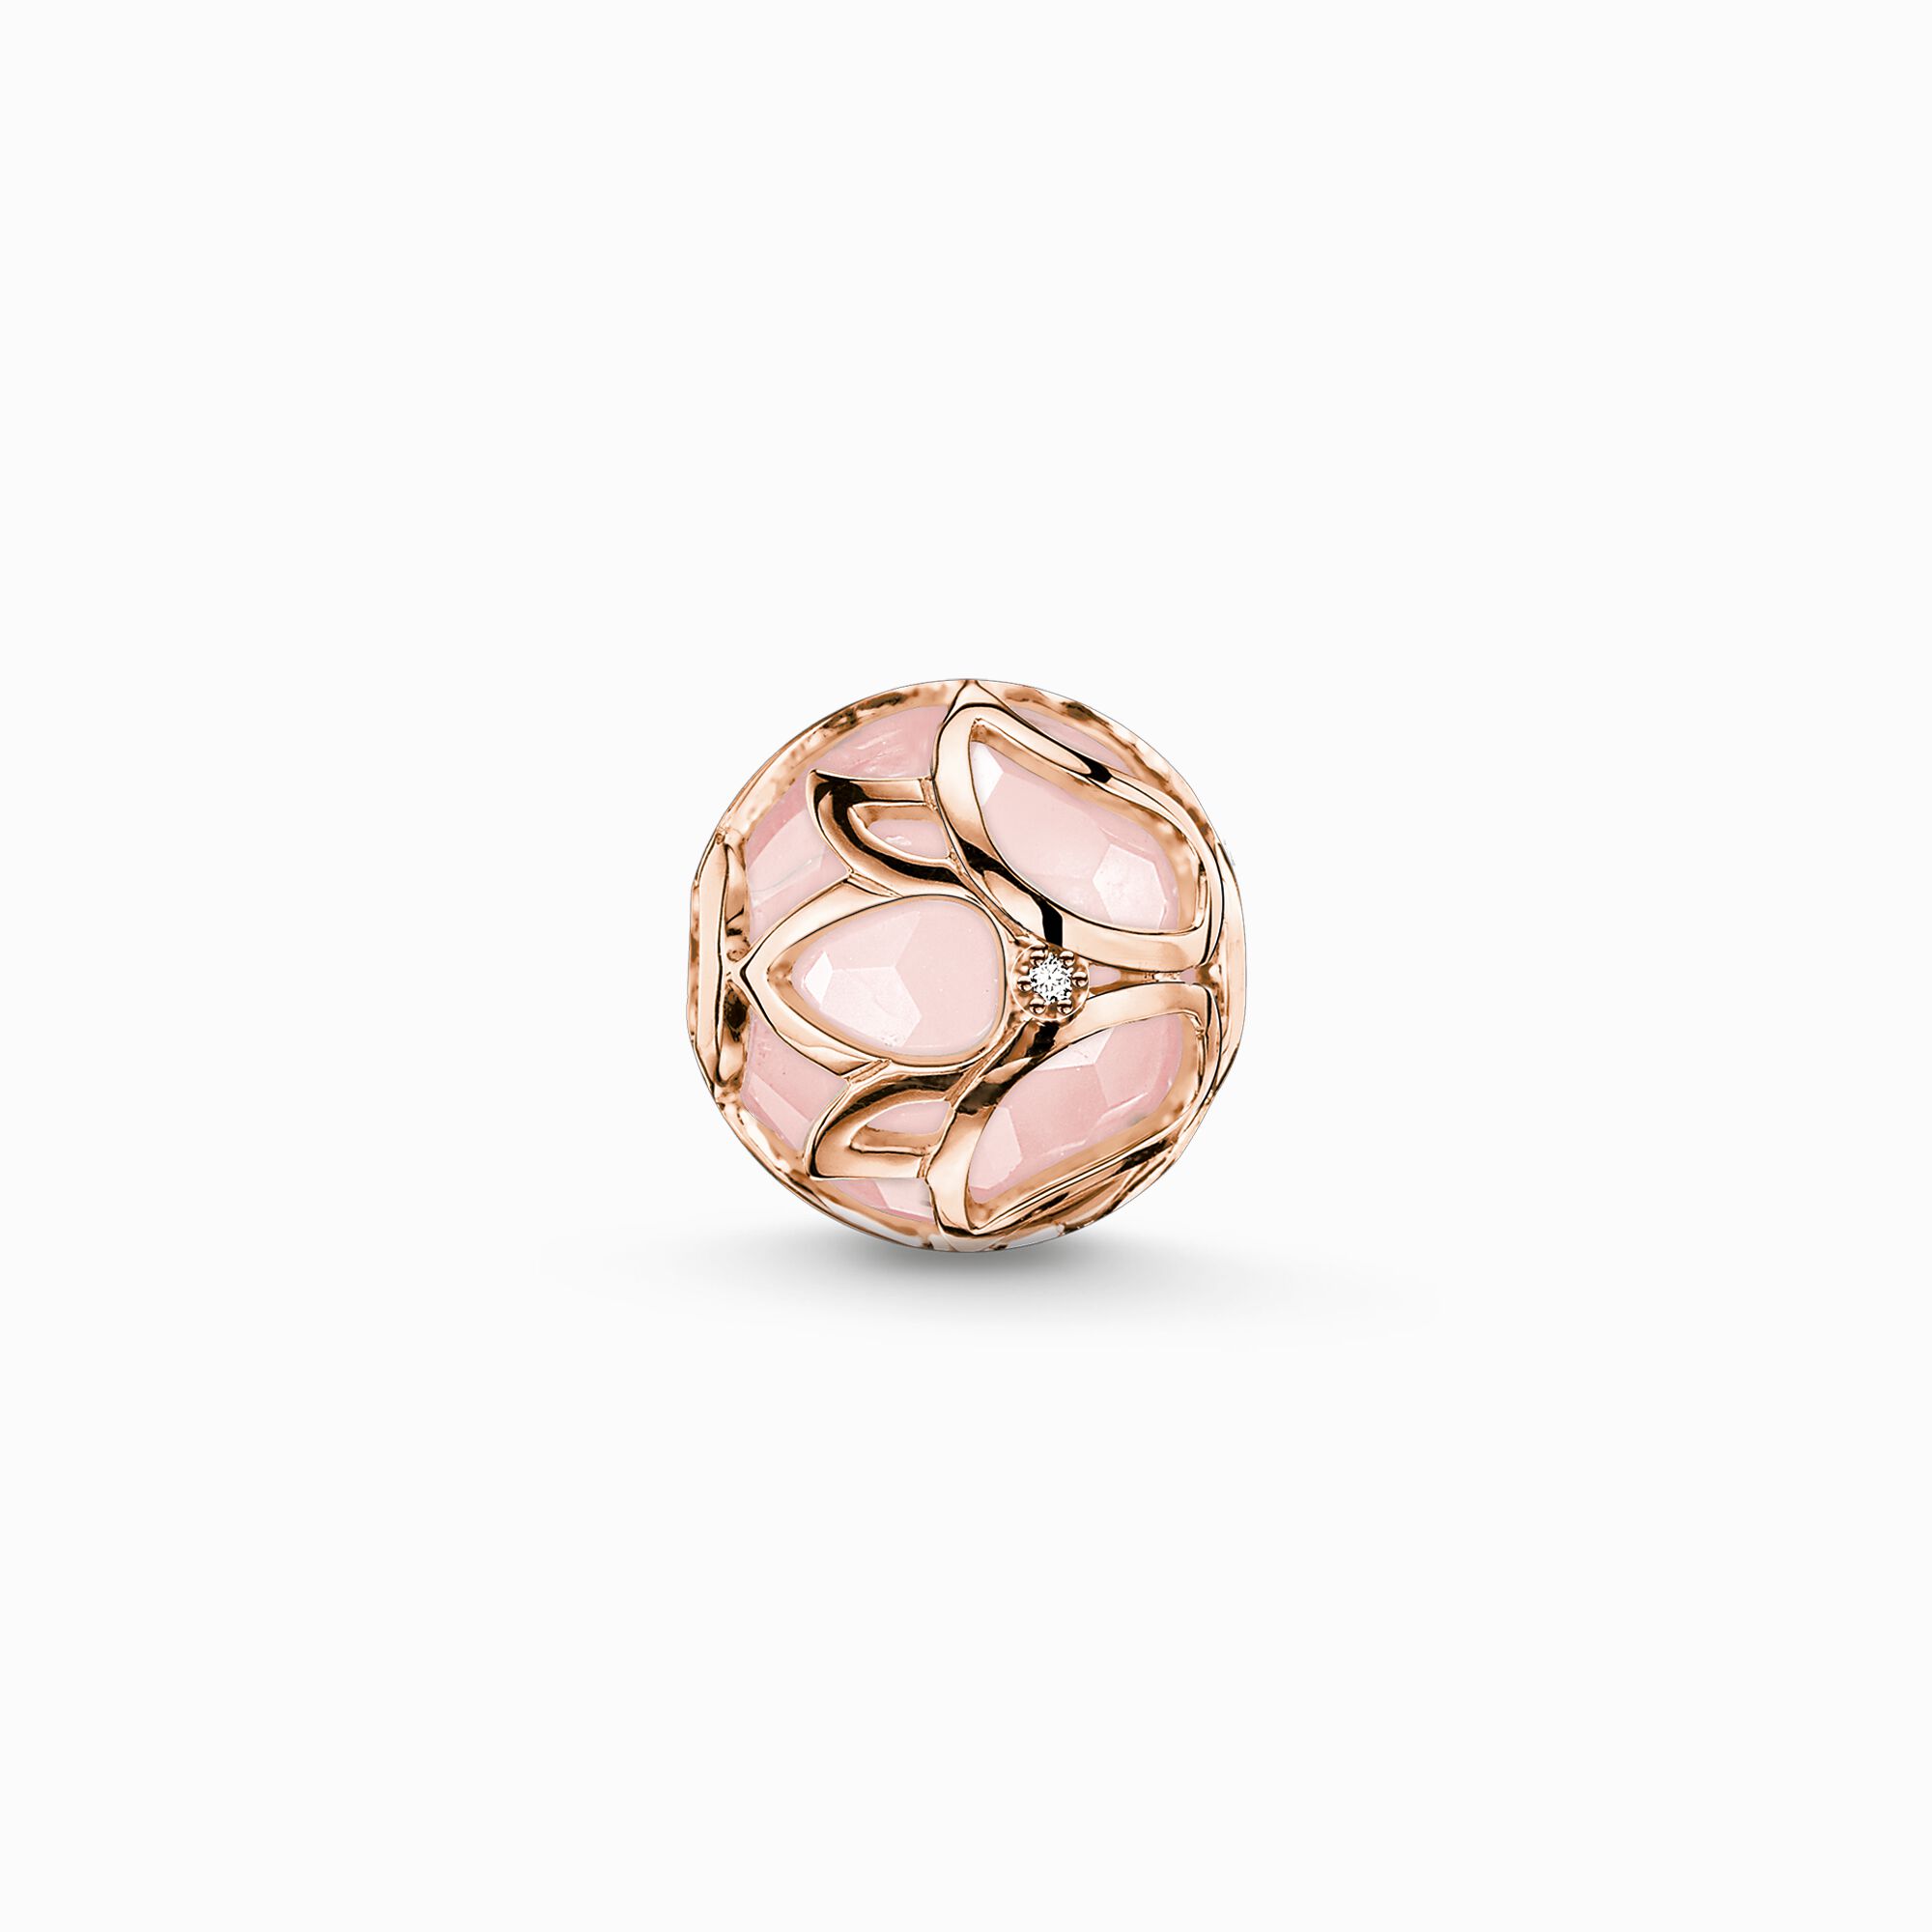 Bead pink lotus flower from the Karma Beads collection in the THOMAS SABO online store